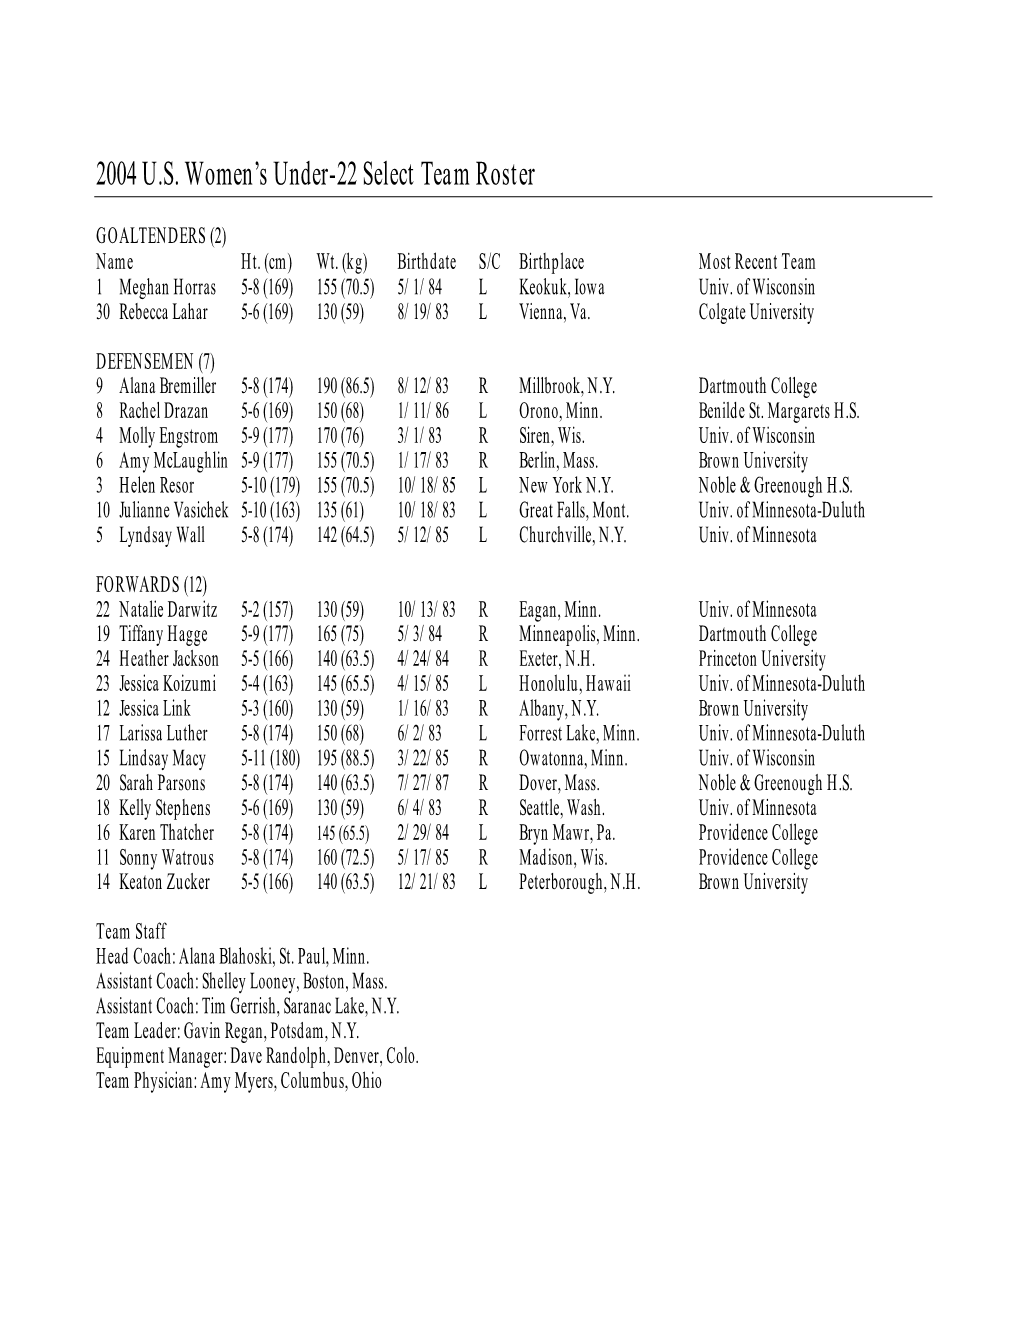 2004 U.S. Women's Under-22 Select Team Roster